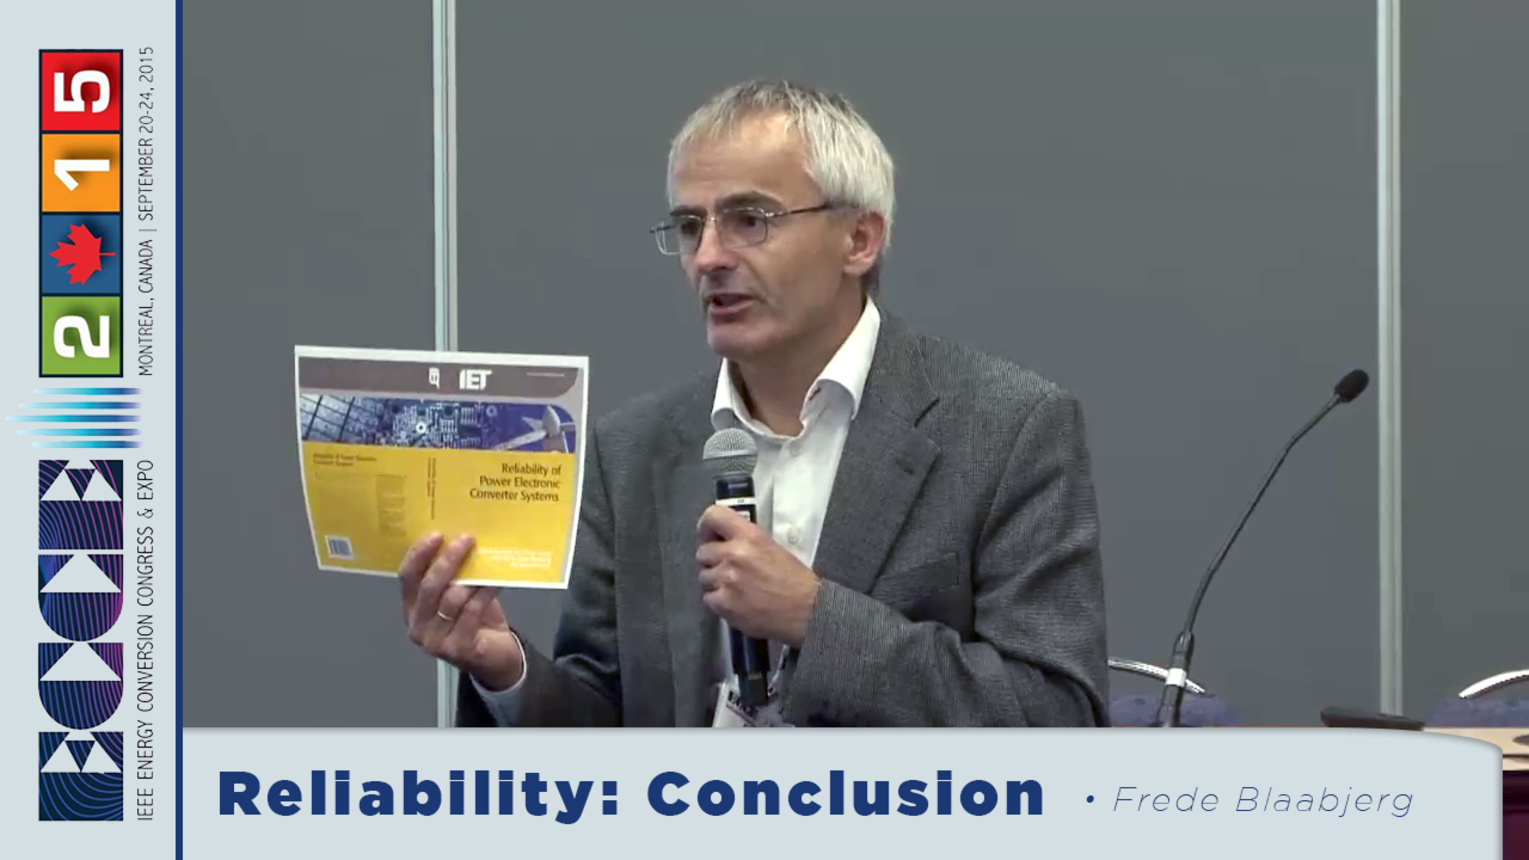 ECCE 2015 Design for Reliability of Power Electronic Systems: Research Opportunities for Reliability Improvement with Frede Blaabjerg (Part 4)